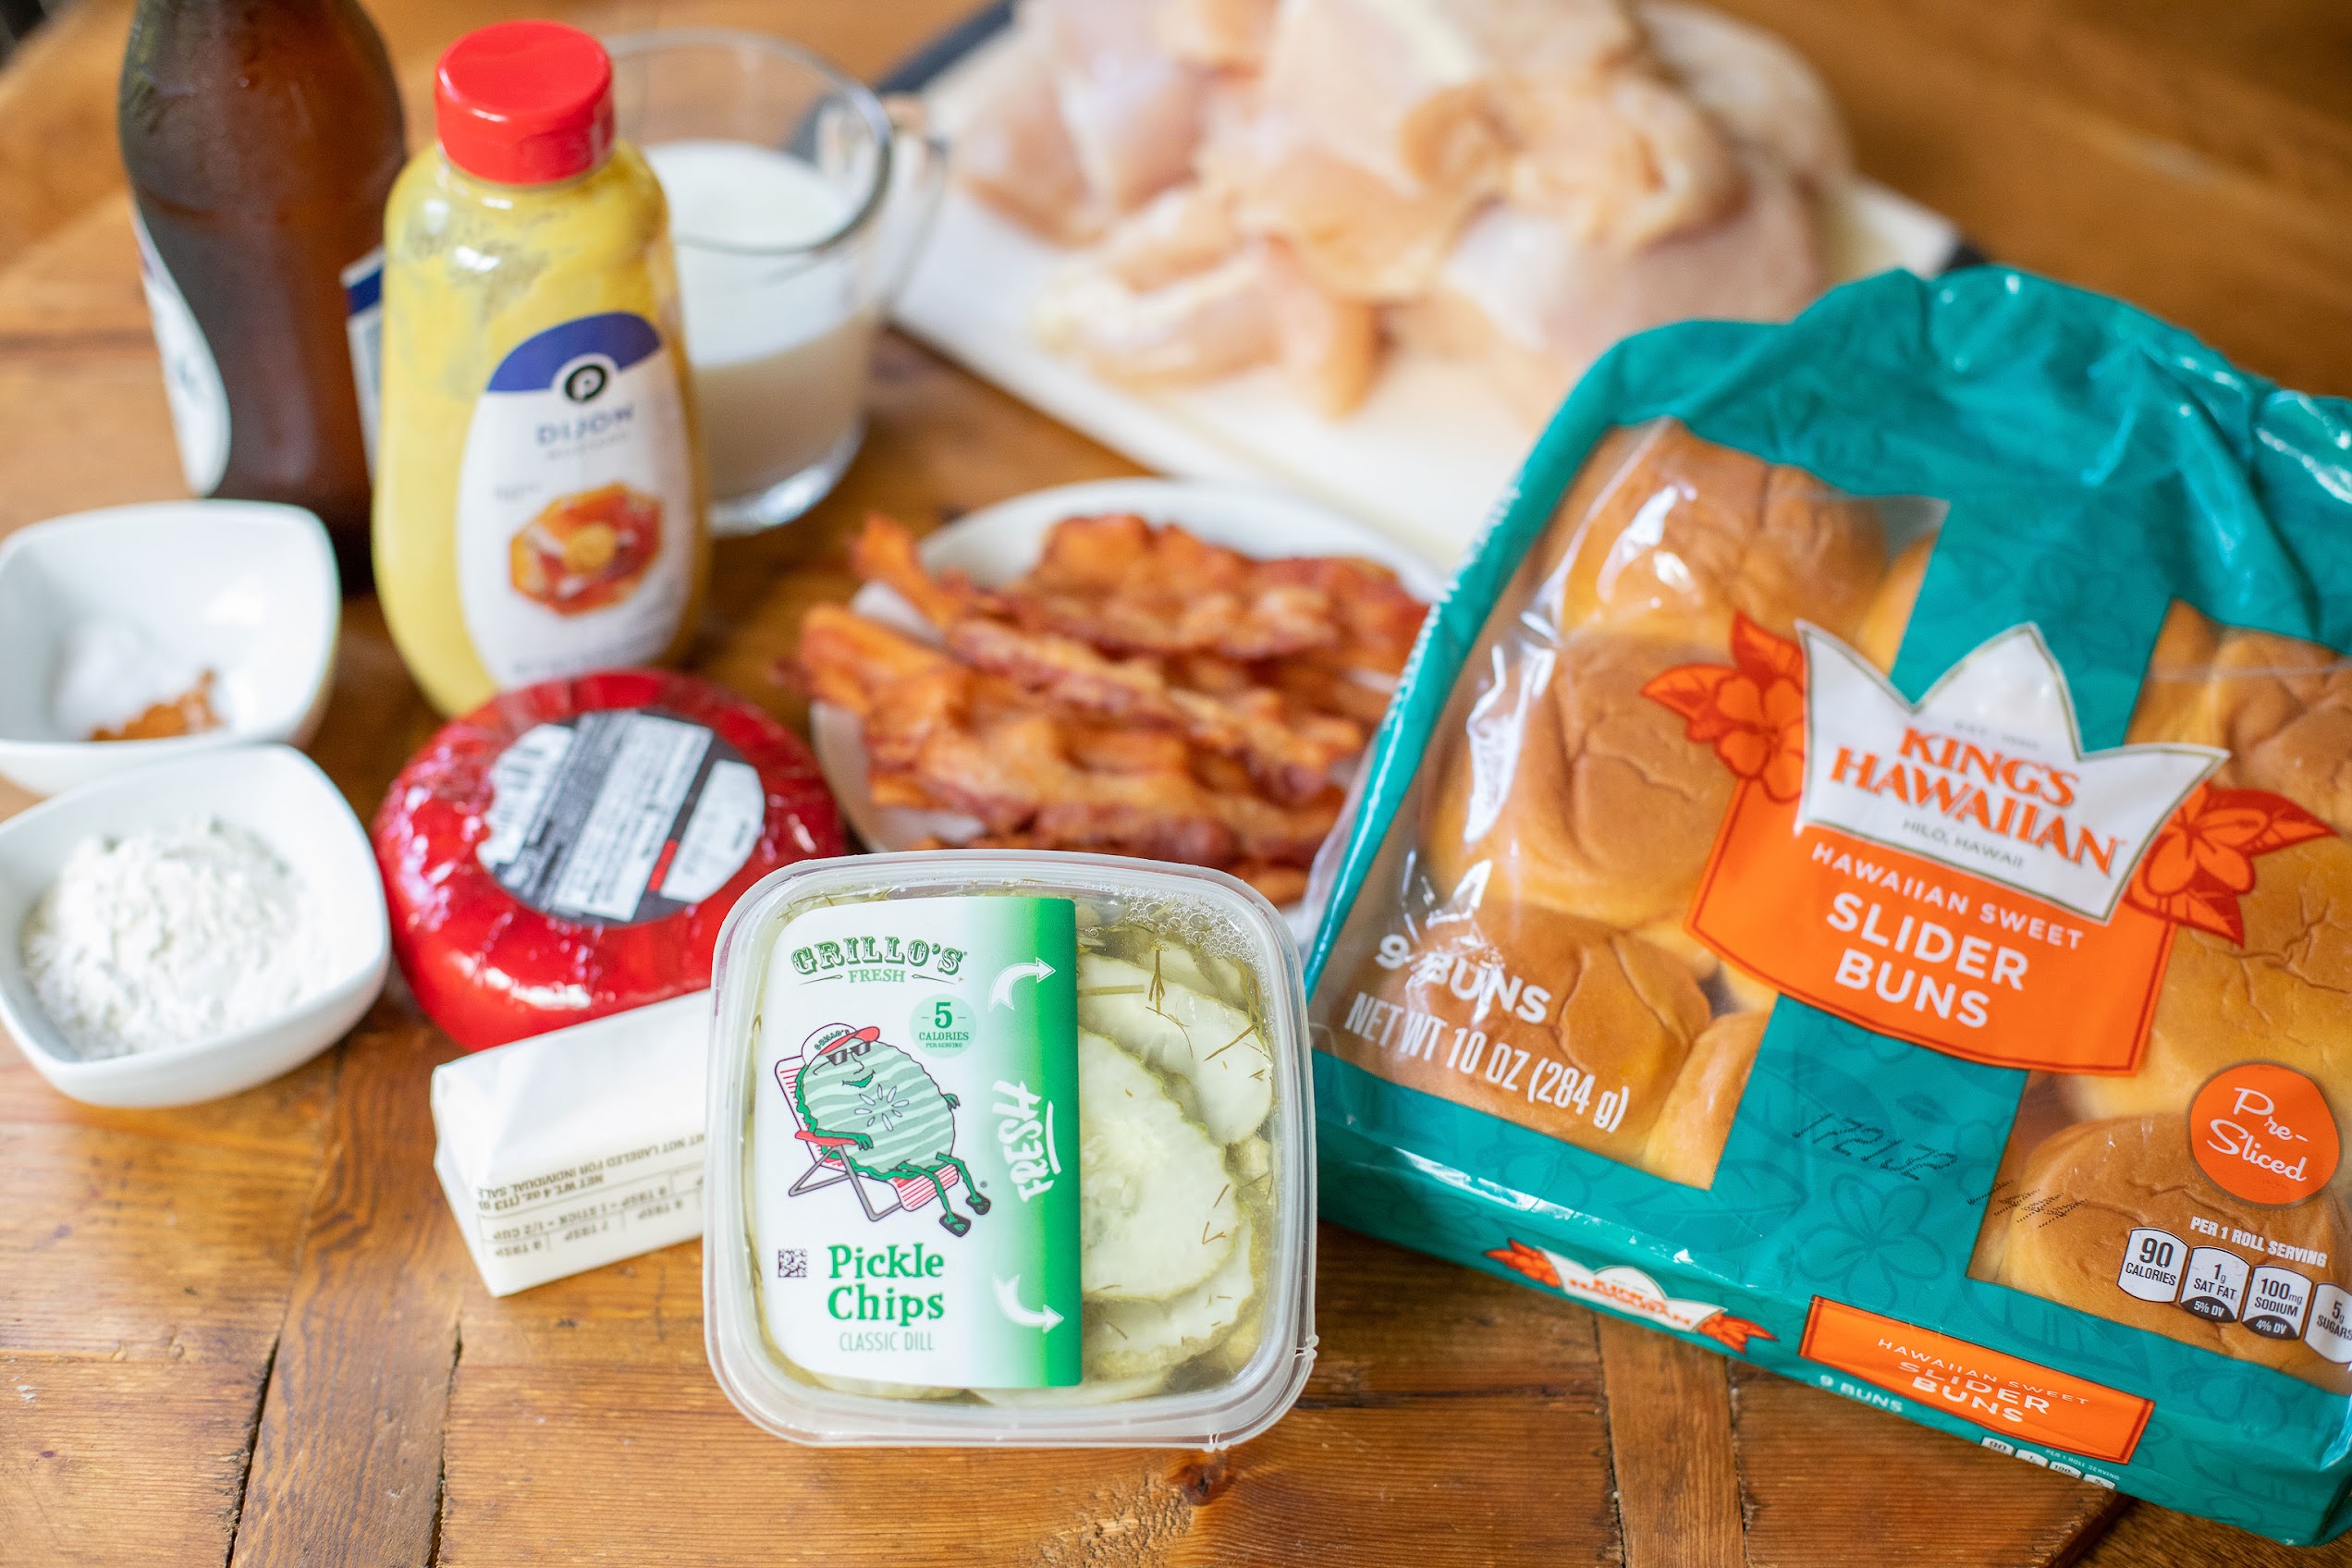 Add These Beer Cheese & Bacon Topped Chicken Sliders To Your Labor Day Menu on I Heart Publix